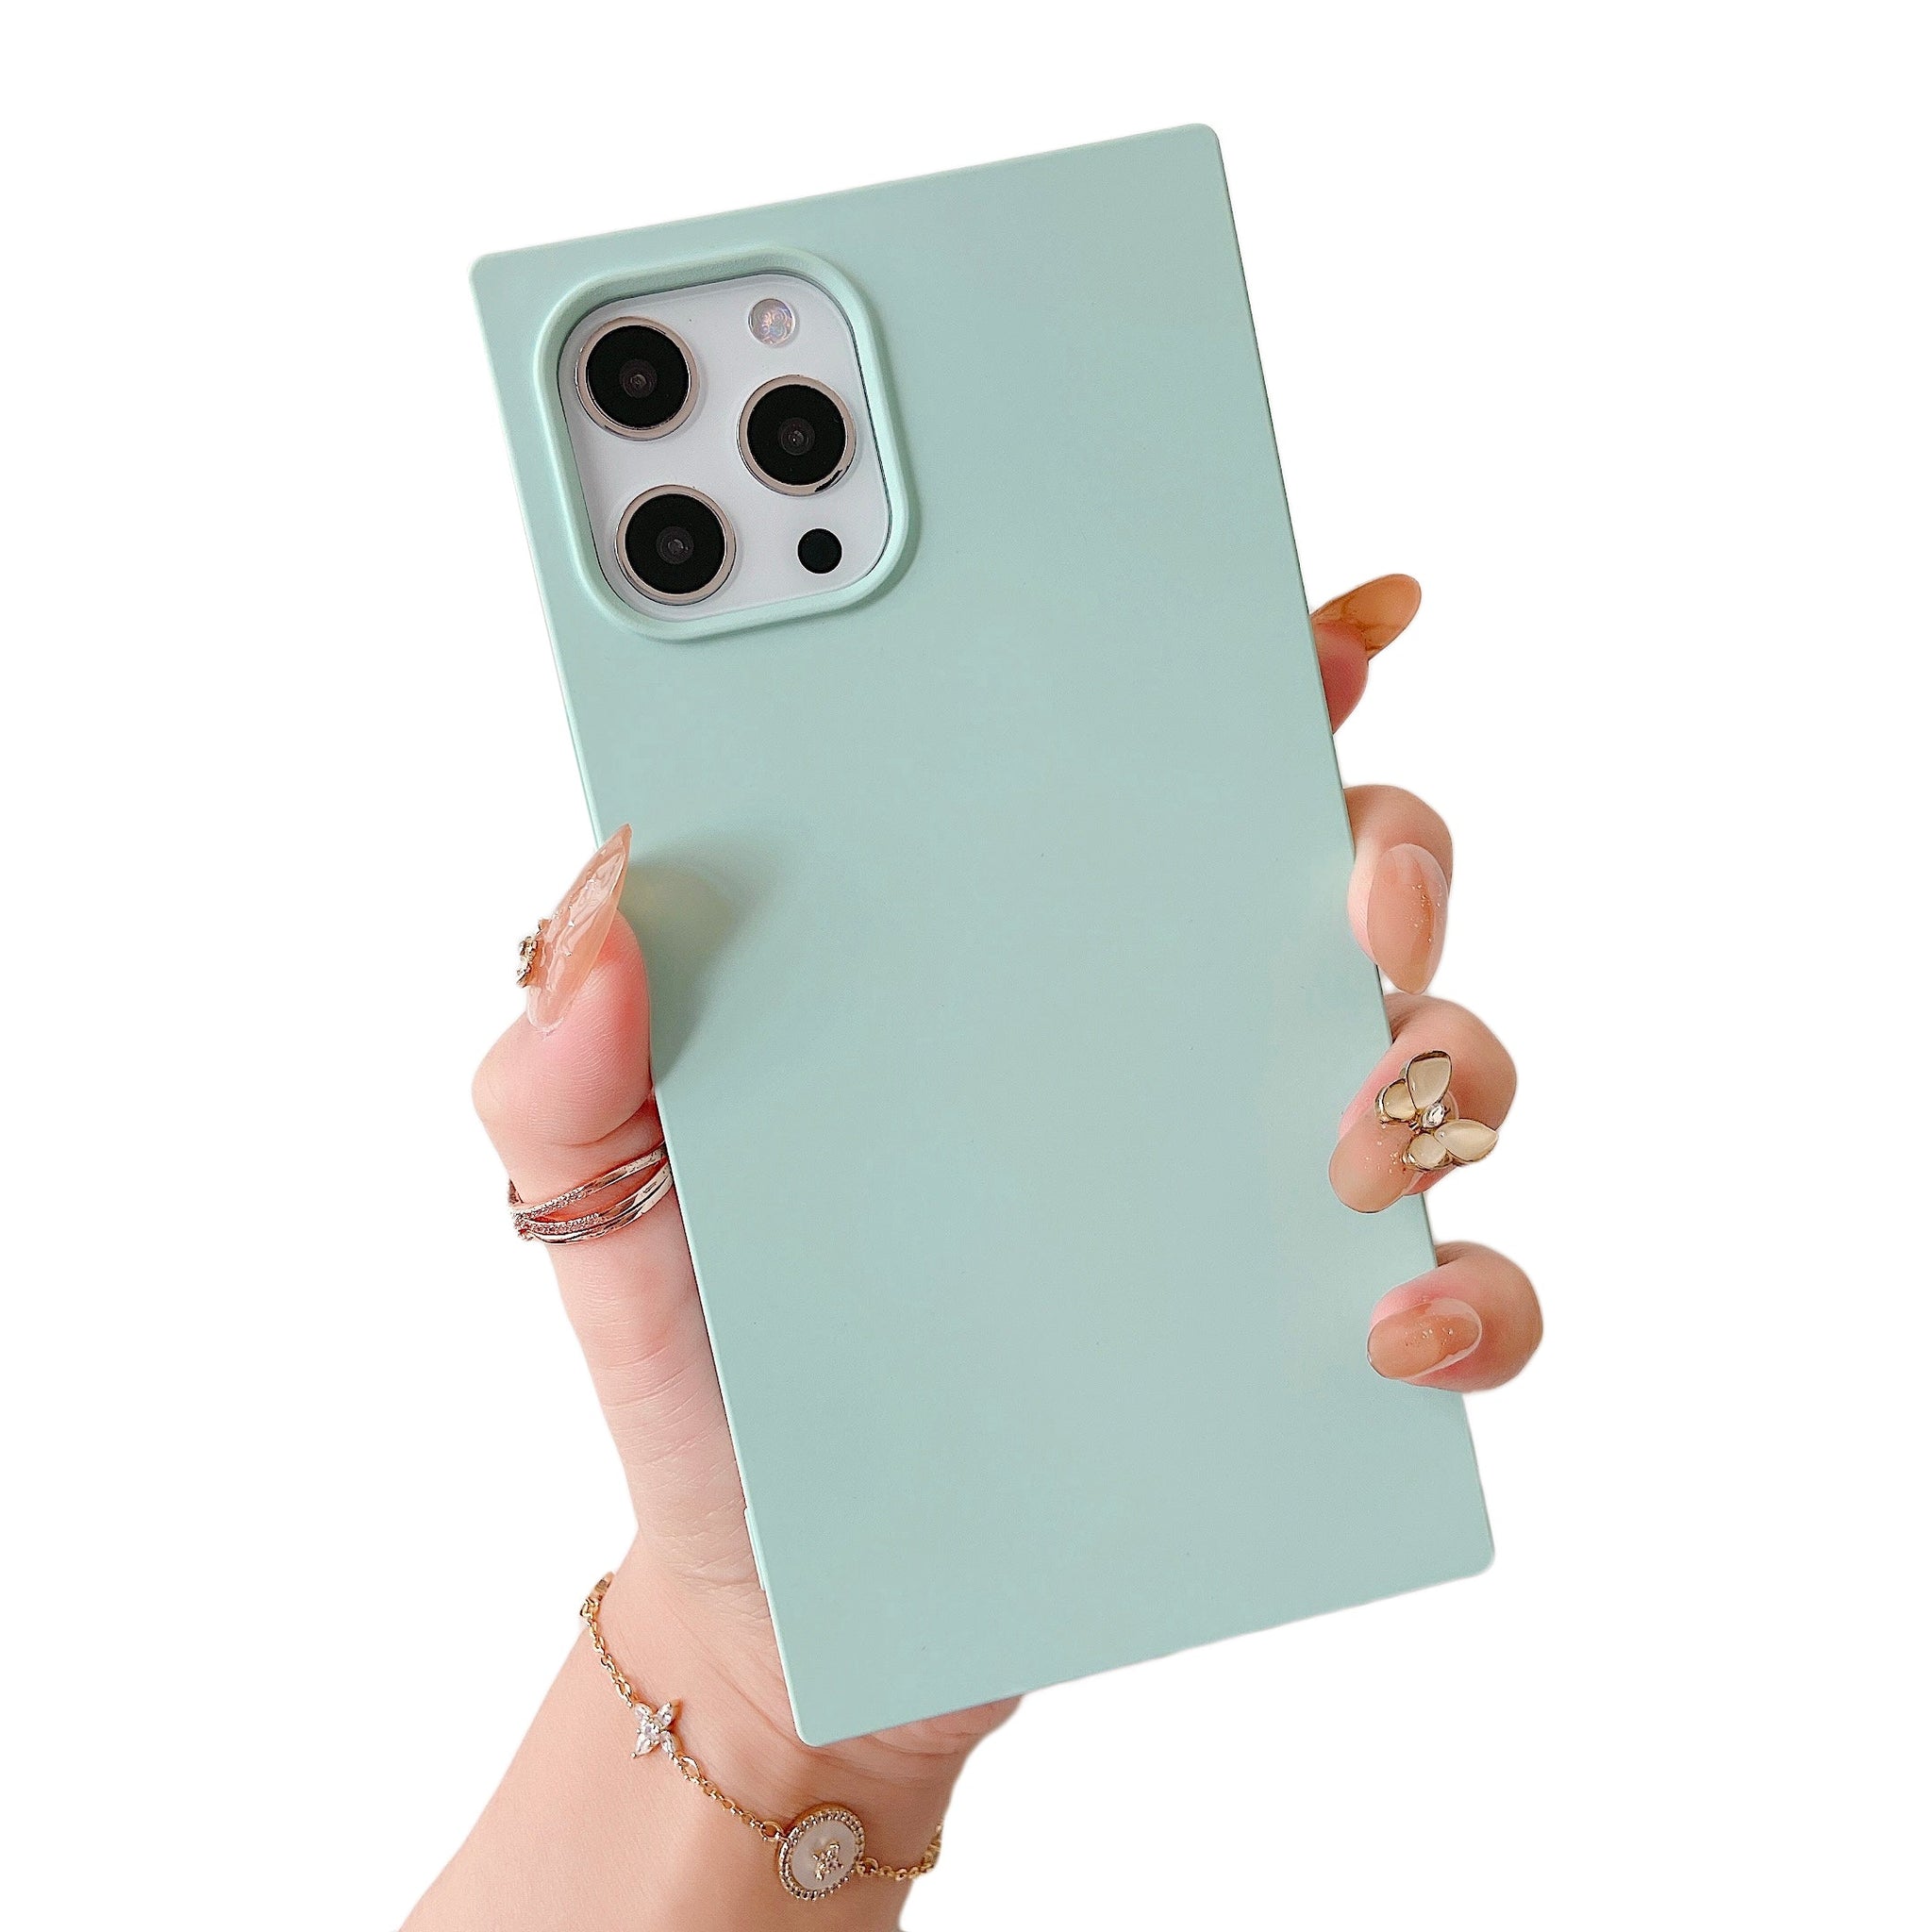 iPhone 11 Pro Case Square Silicone (Mint Green)